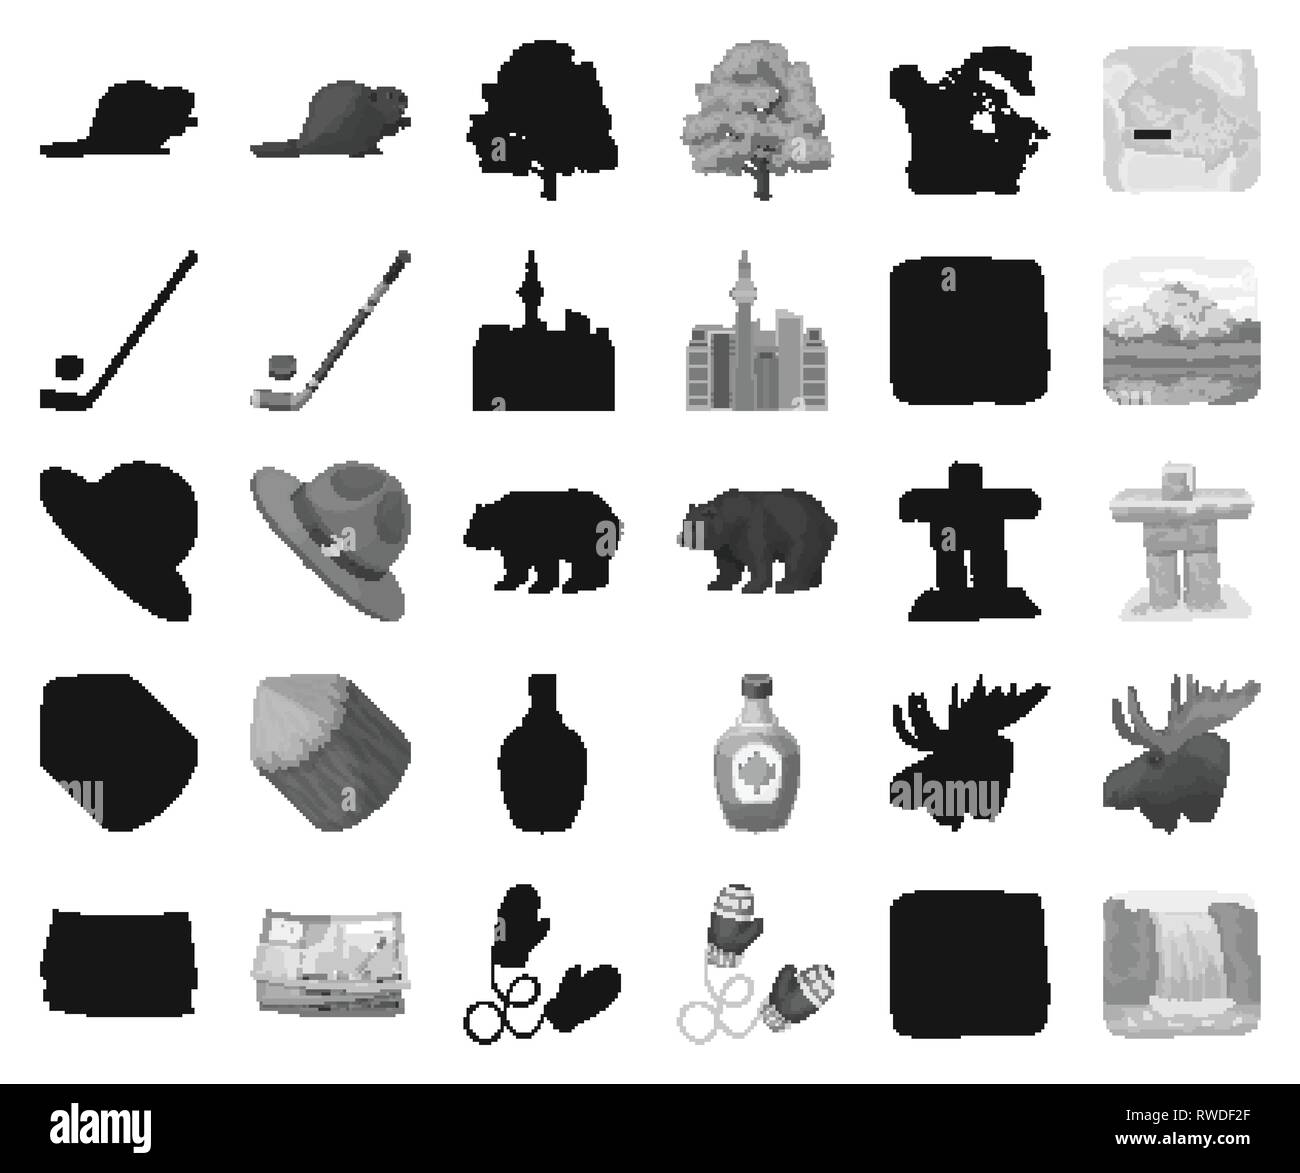 animal,attributes,bear,beaver,black,monochrome,bottle,building,canada,city,collection,country,culture,custom,deer,design,dollar,elk,features,fir,glove,handgrip,hat,horns,icon,illustration,isolated,landmark,log,maple,mountain,nation,nationality,nature,ocean,puck,ranger,set,sign,sky,snow,stick,stone,symbol,syrup,territory,travel,tree,vector,waterfall,wild Vector Vectors , Stock Vector